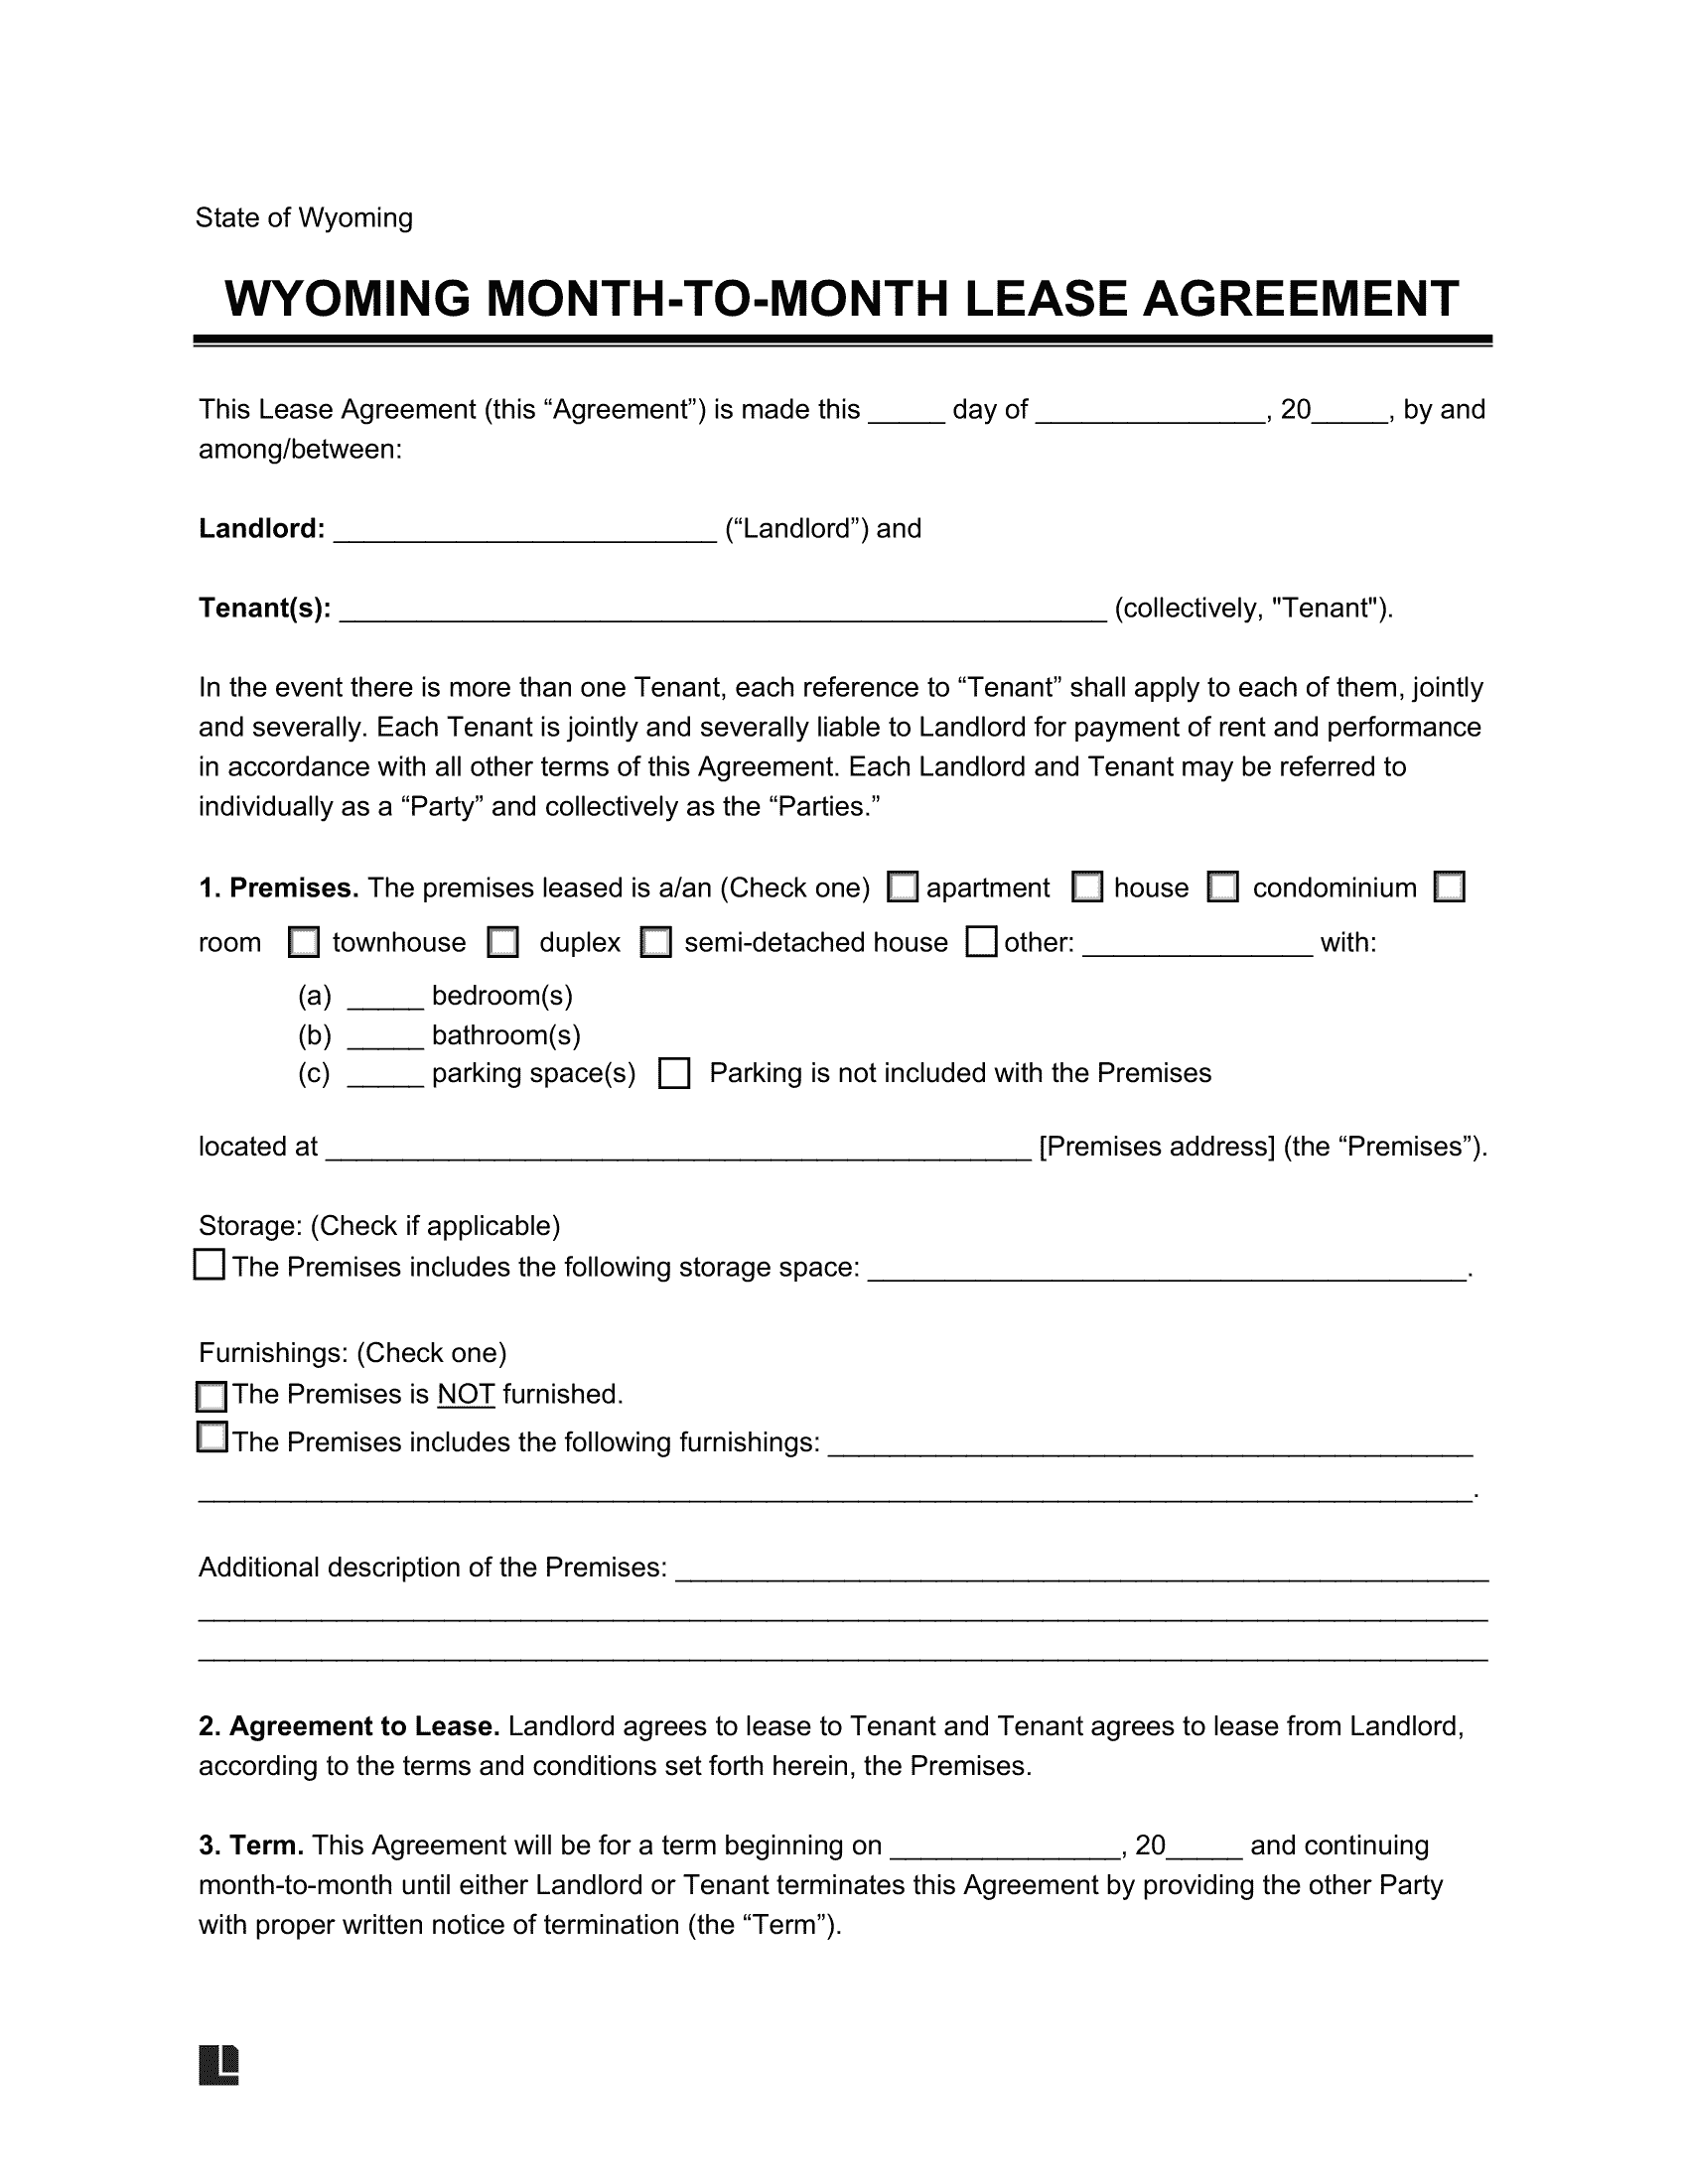 Wyoming Month-to-Month Rental Agreement